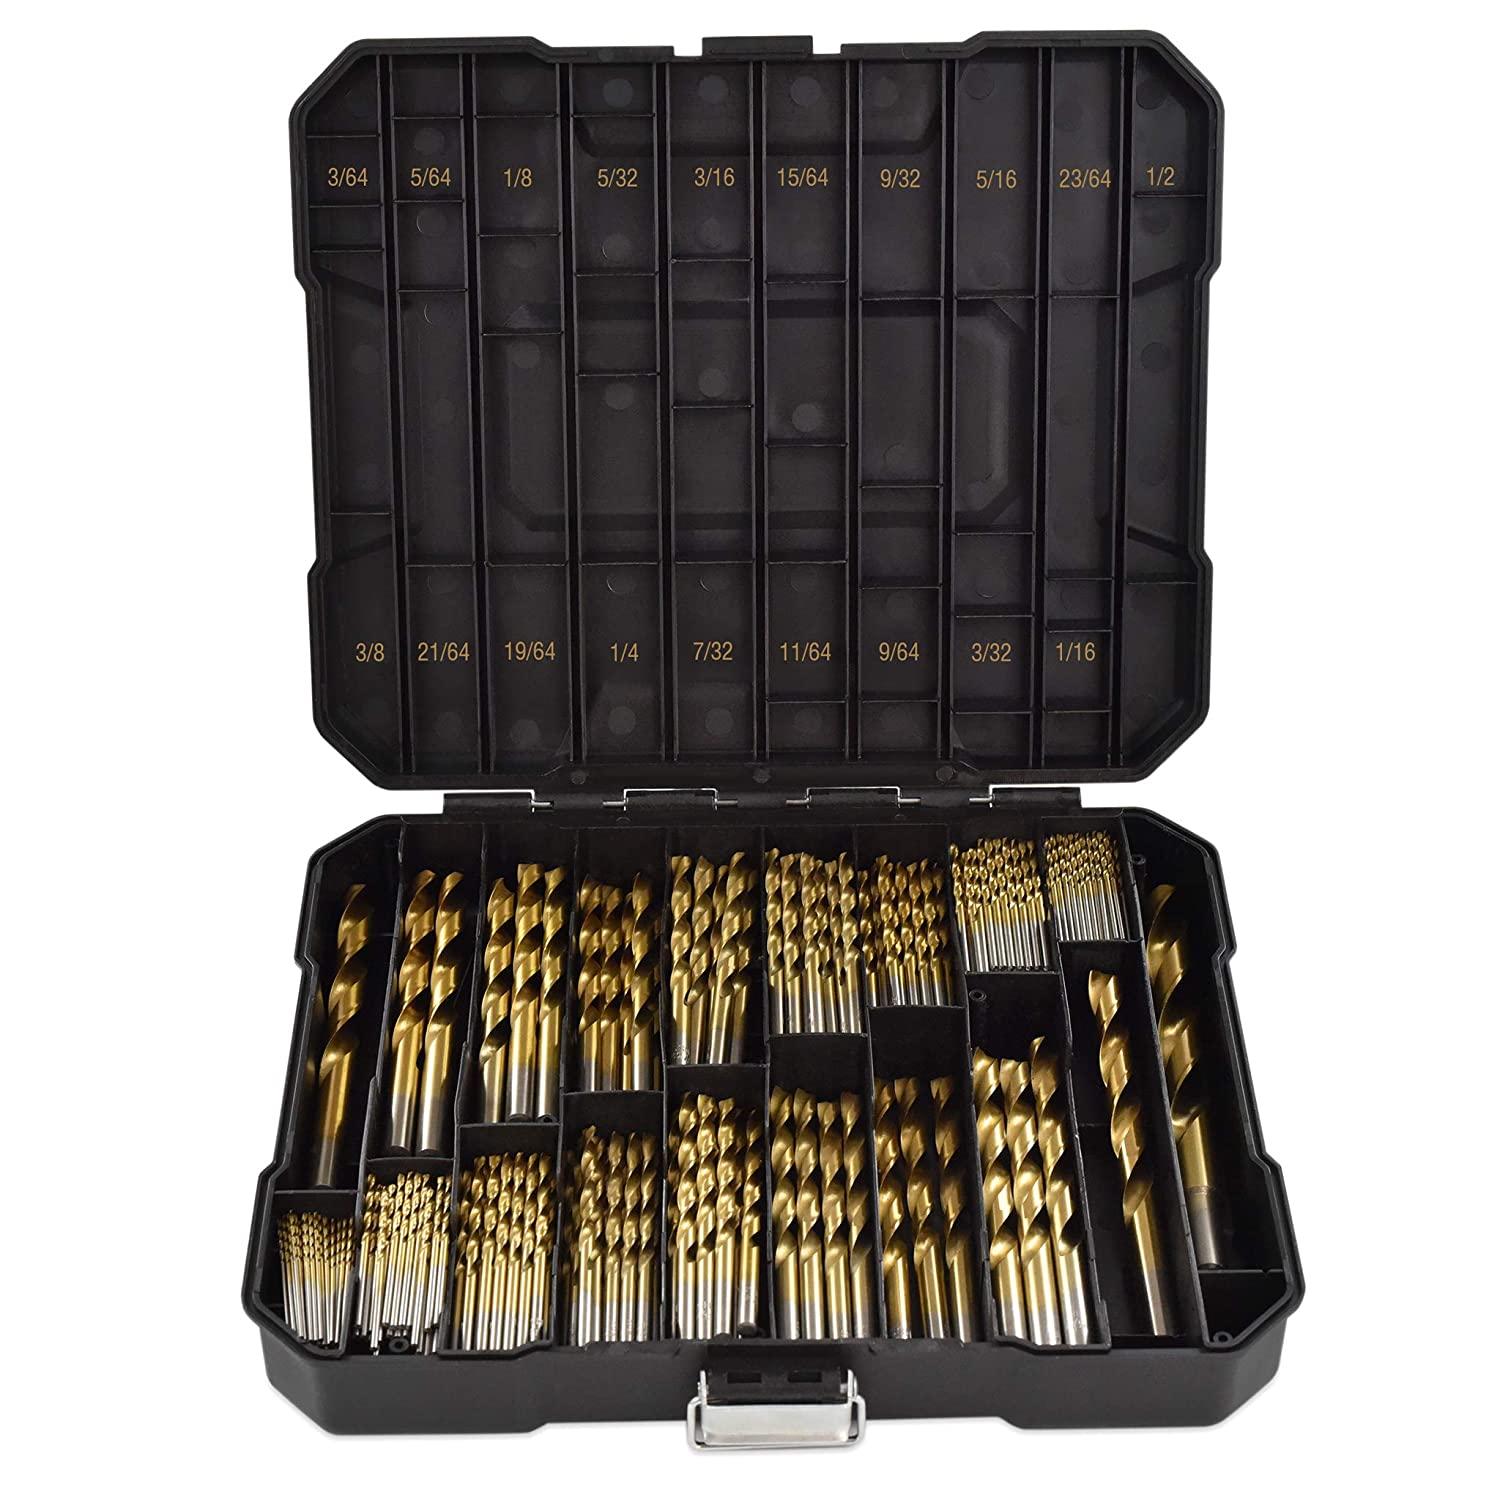 230 Piece 135 Degree High Speed Drill Bits for $22.54 Shipped